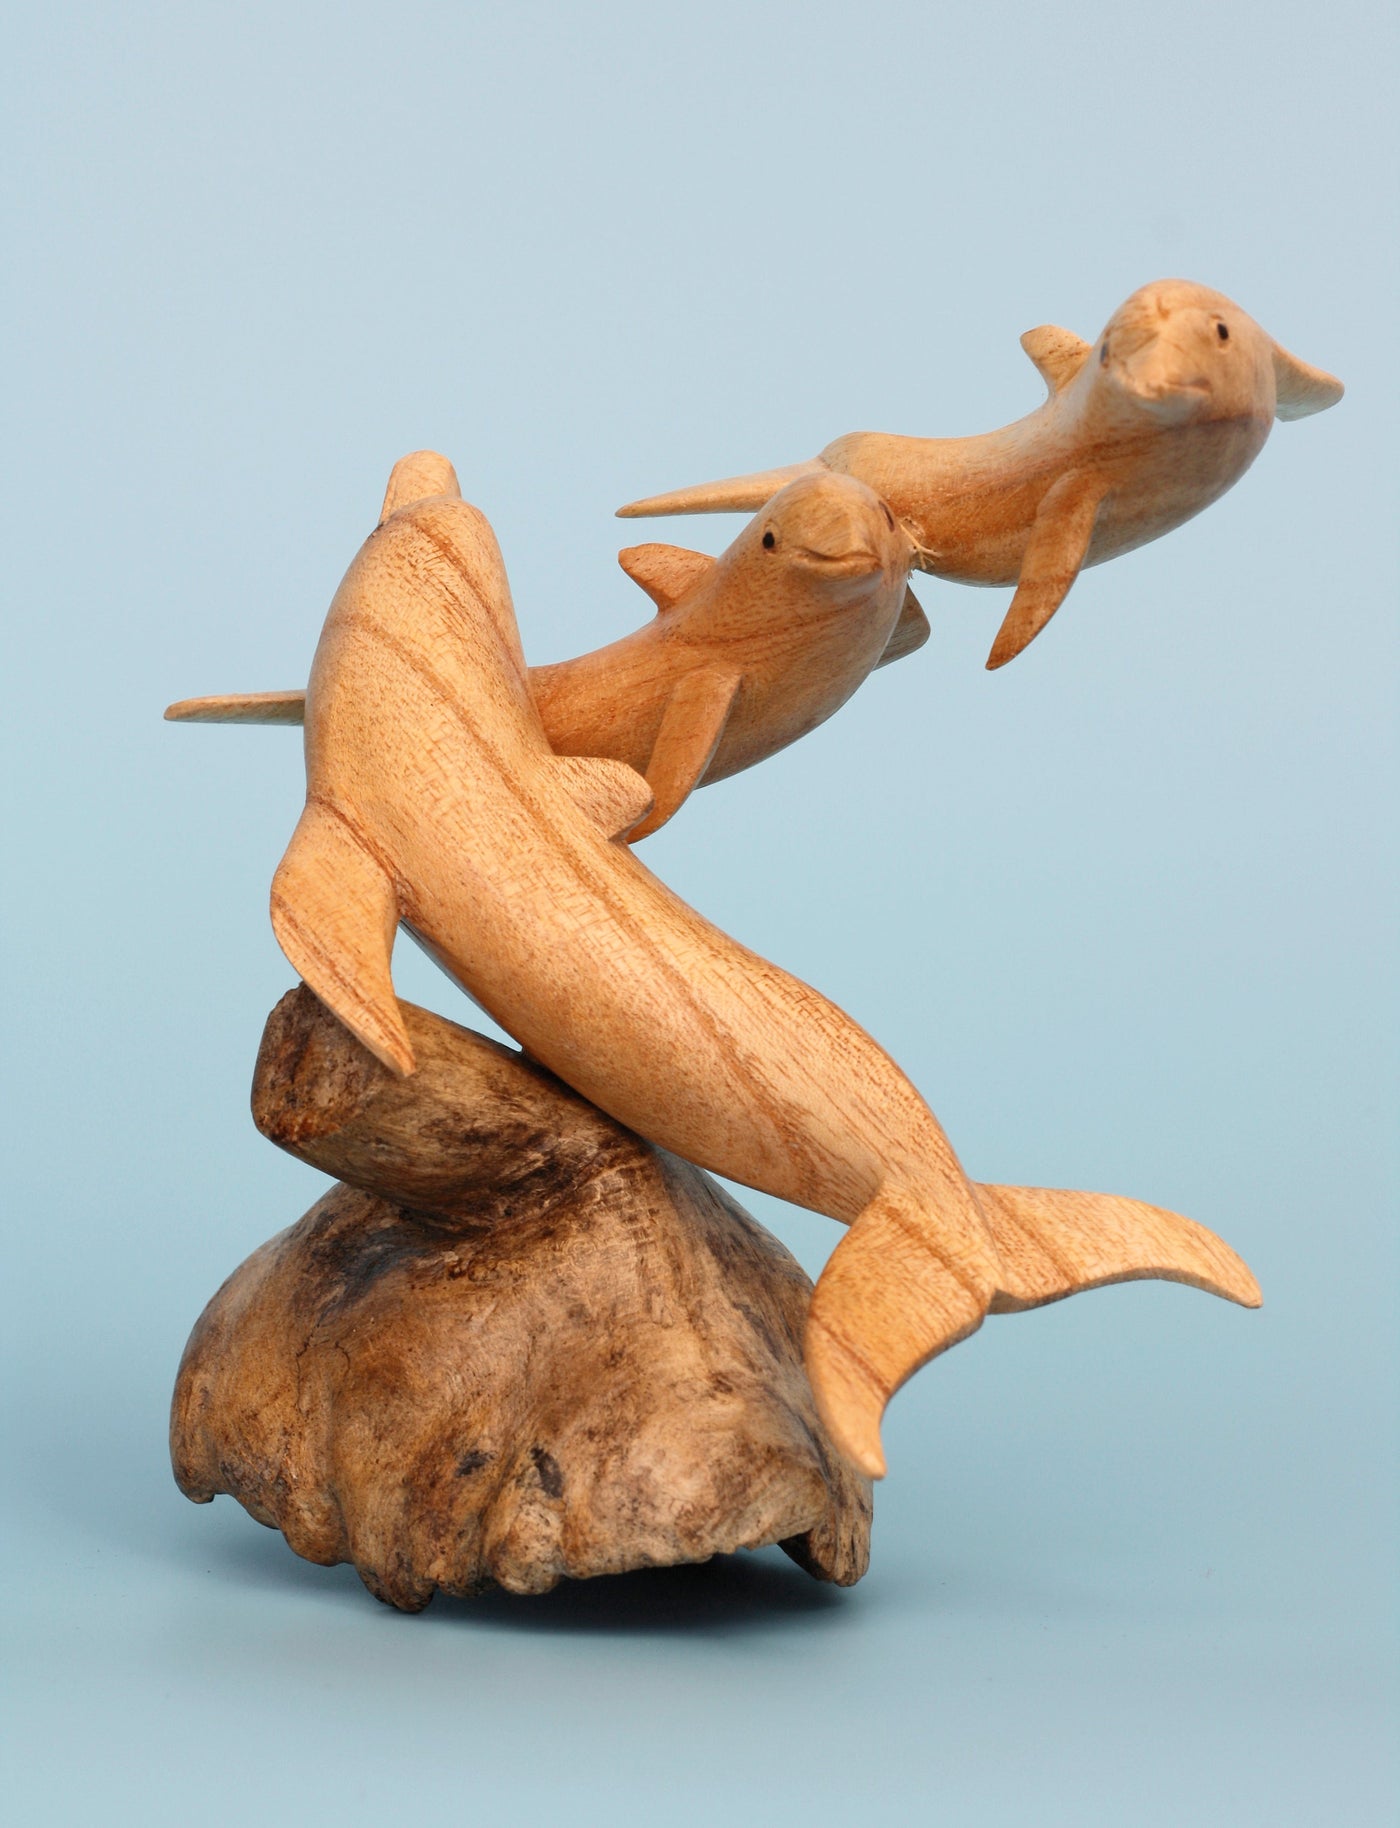 Wooden Hand Carved 3 Dolphins Statue Sculpture Wood Decorative Home Decor Accent Fish Figurine Handcrafted Handmade Tropical Nautical Ocean Coastal